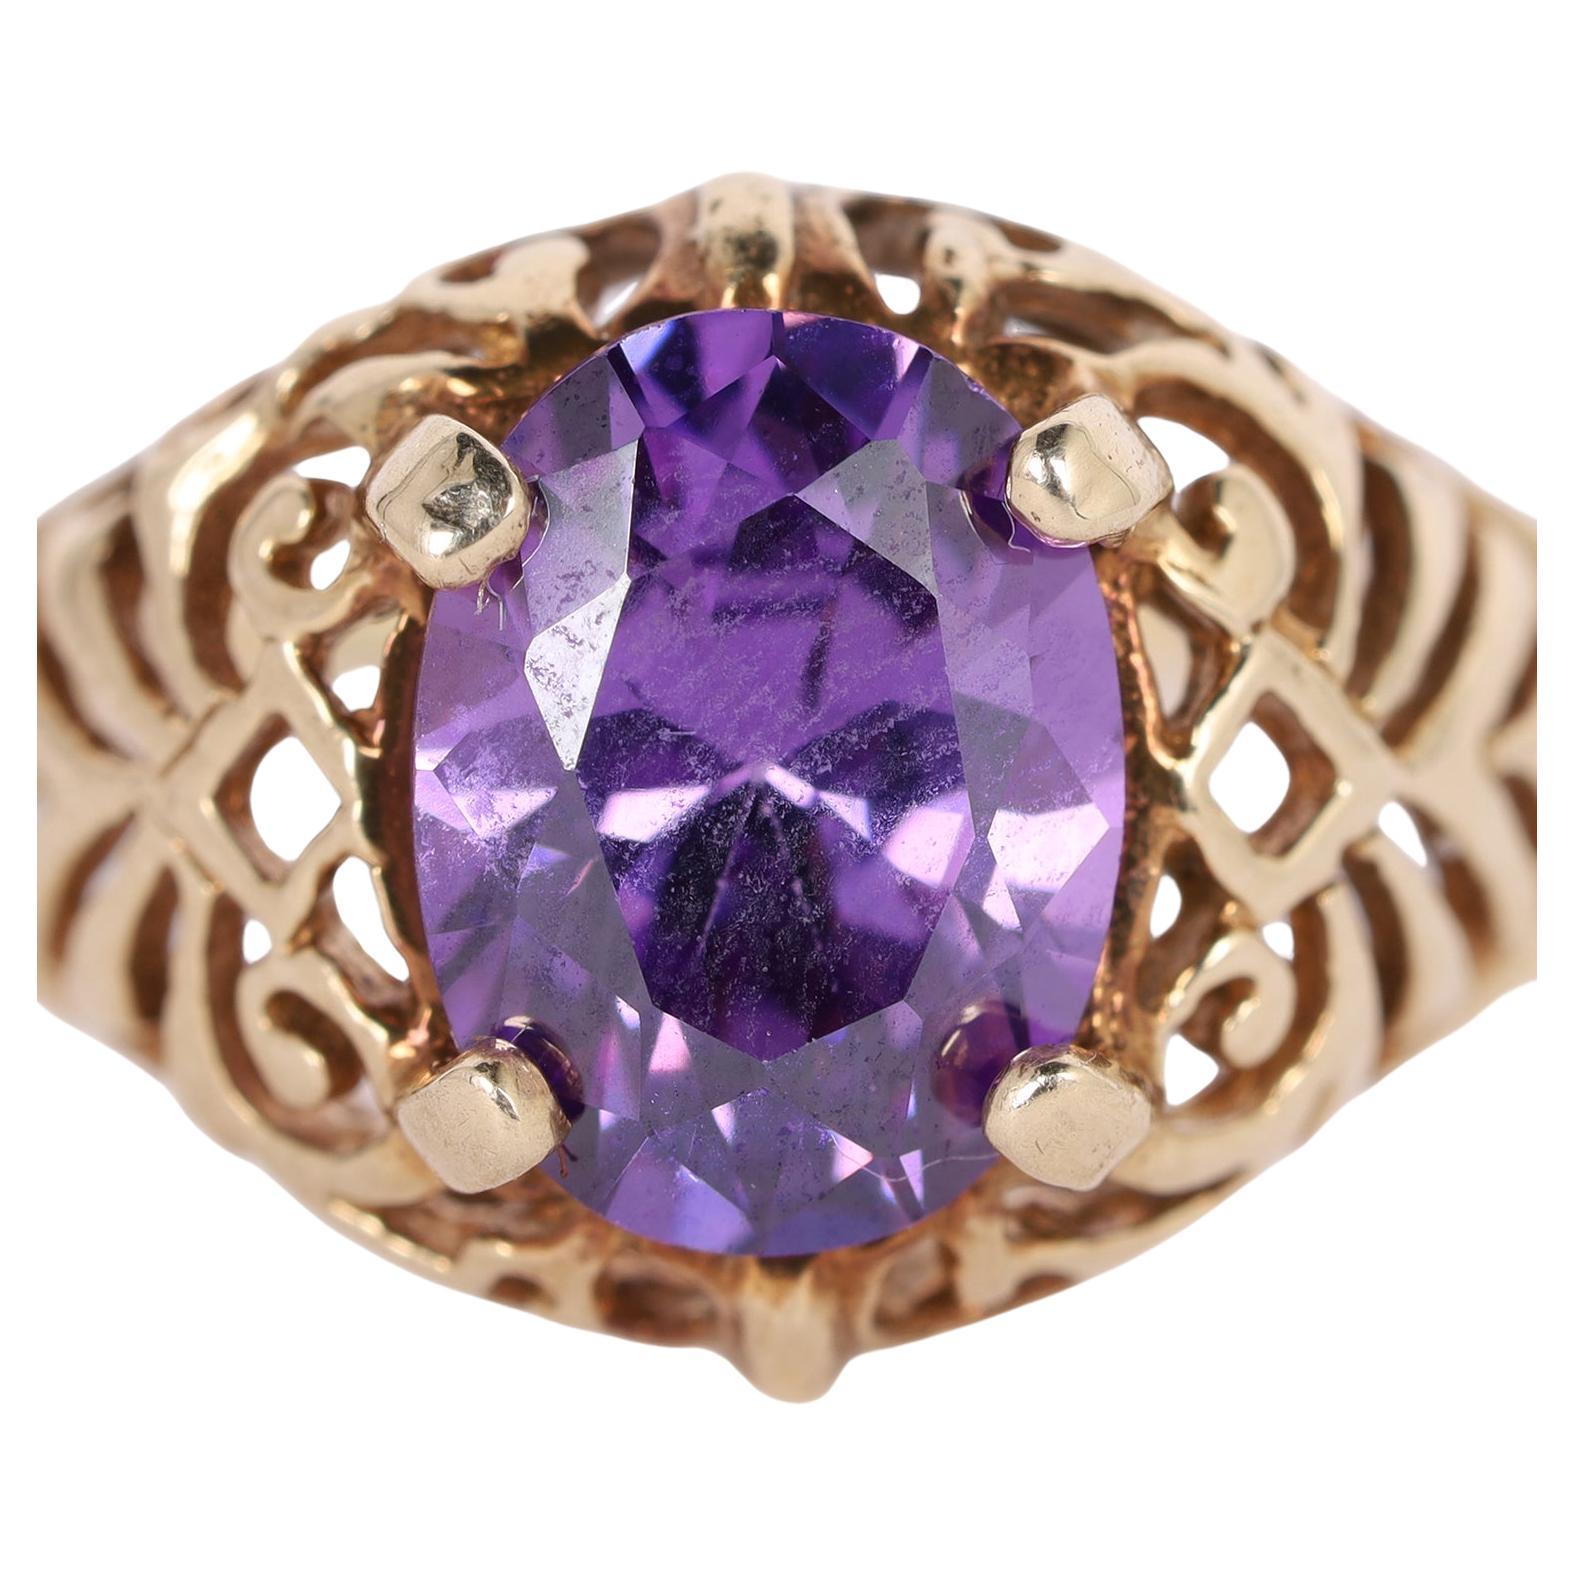 Curated by The Lady Bag Ladies 

Being offered for sale is a 10Kt Yellow Royal Purple Amethyst Solitaire Ring Size 8.5

This ring features an oval cut and prong set royal purple amethyst as the main and only stone. It measures 7.95mm in length and